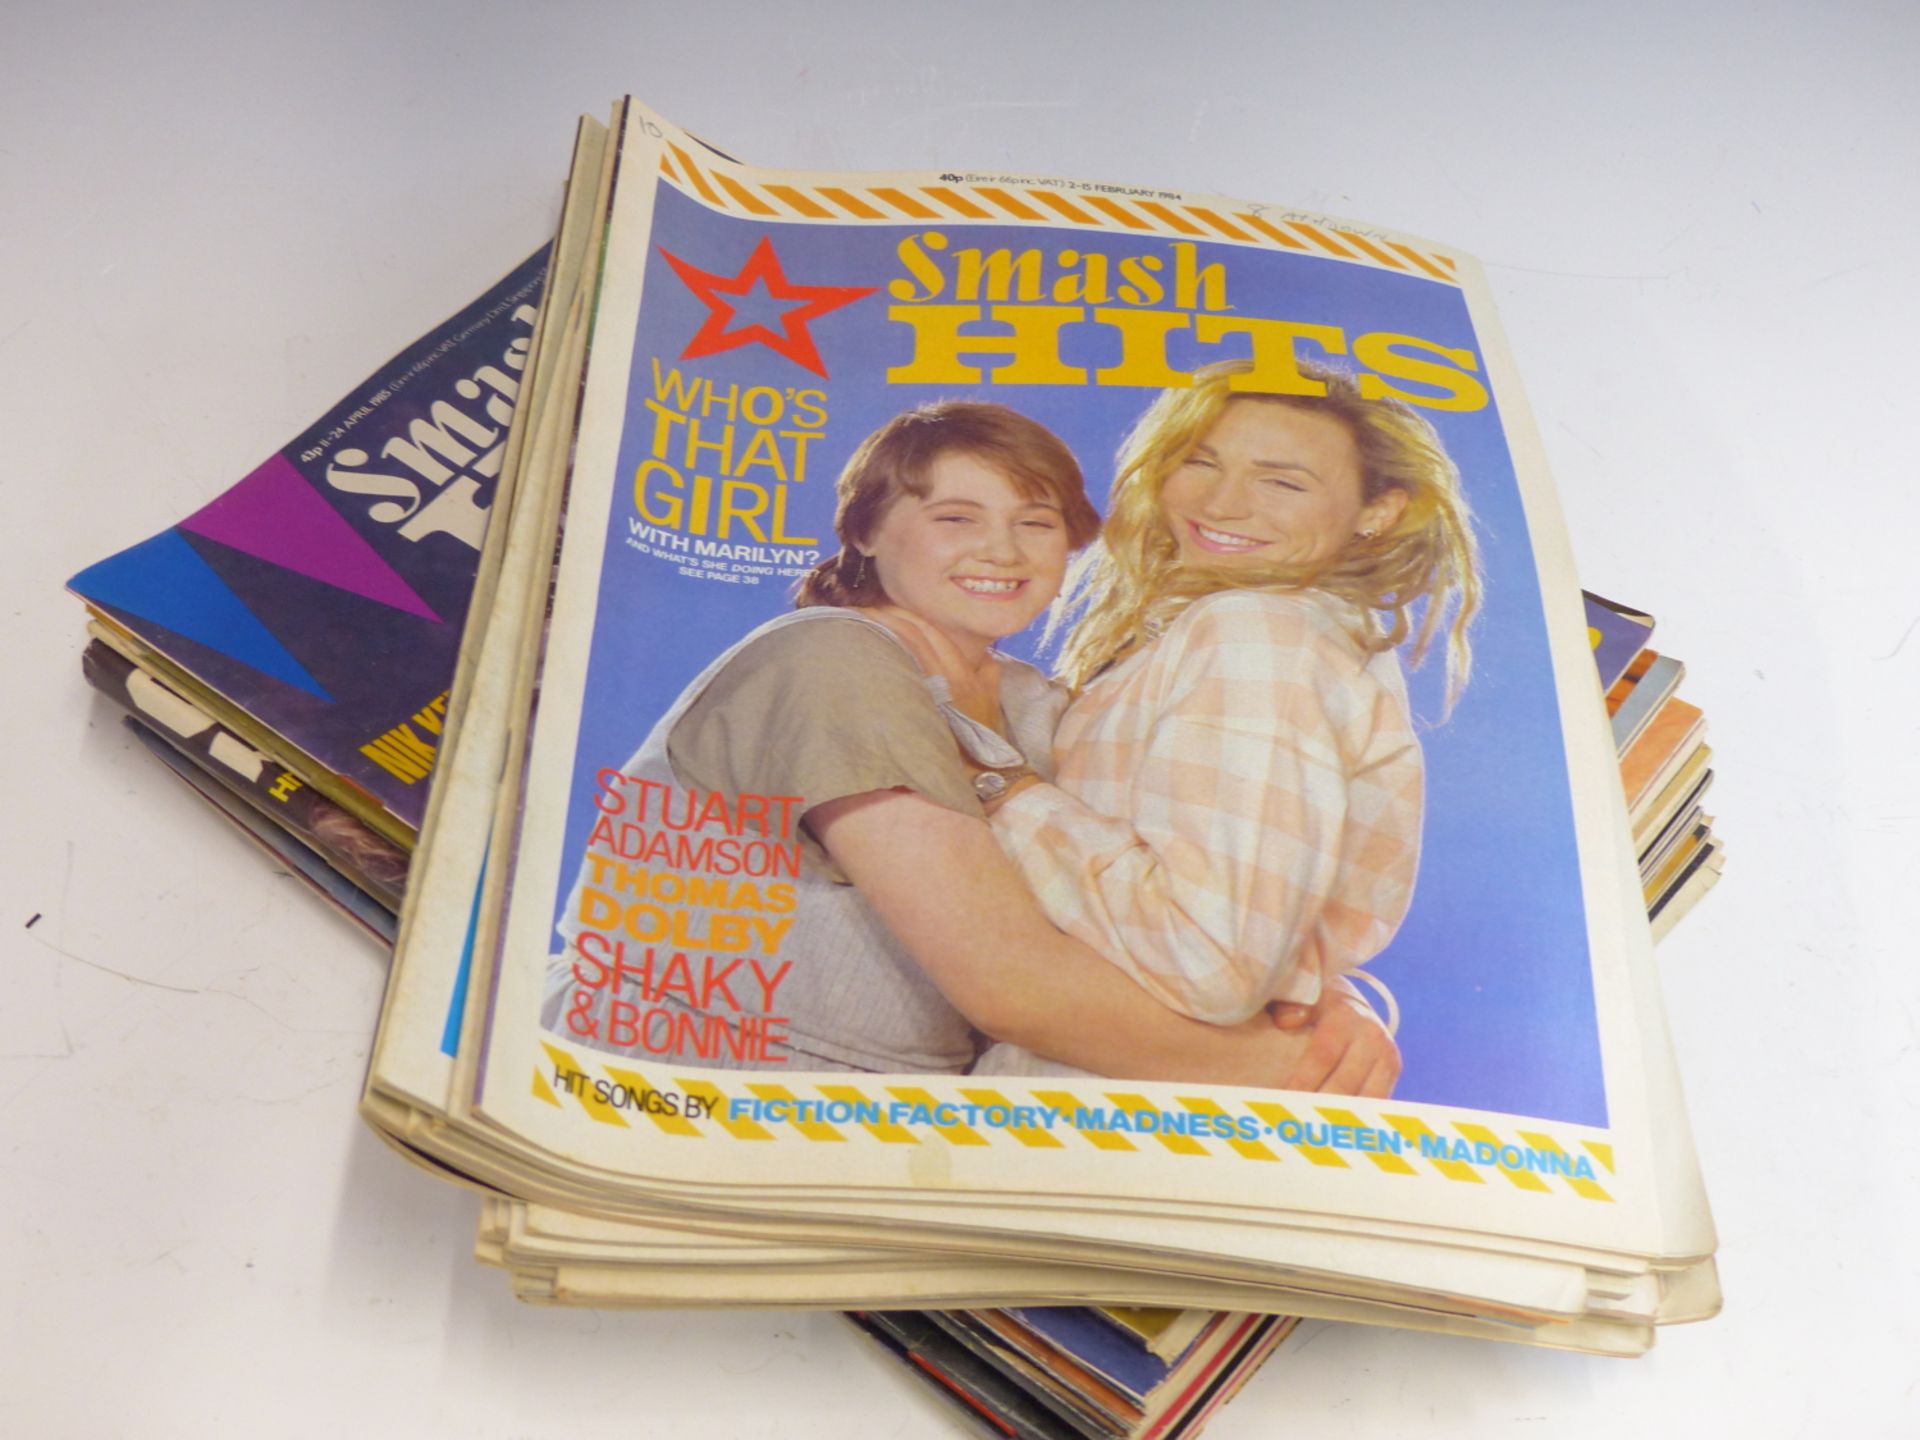 A COLLECTION OF VINTAGE 1980'S SMASH HITS MAGAZINES. - Image 2 of 4